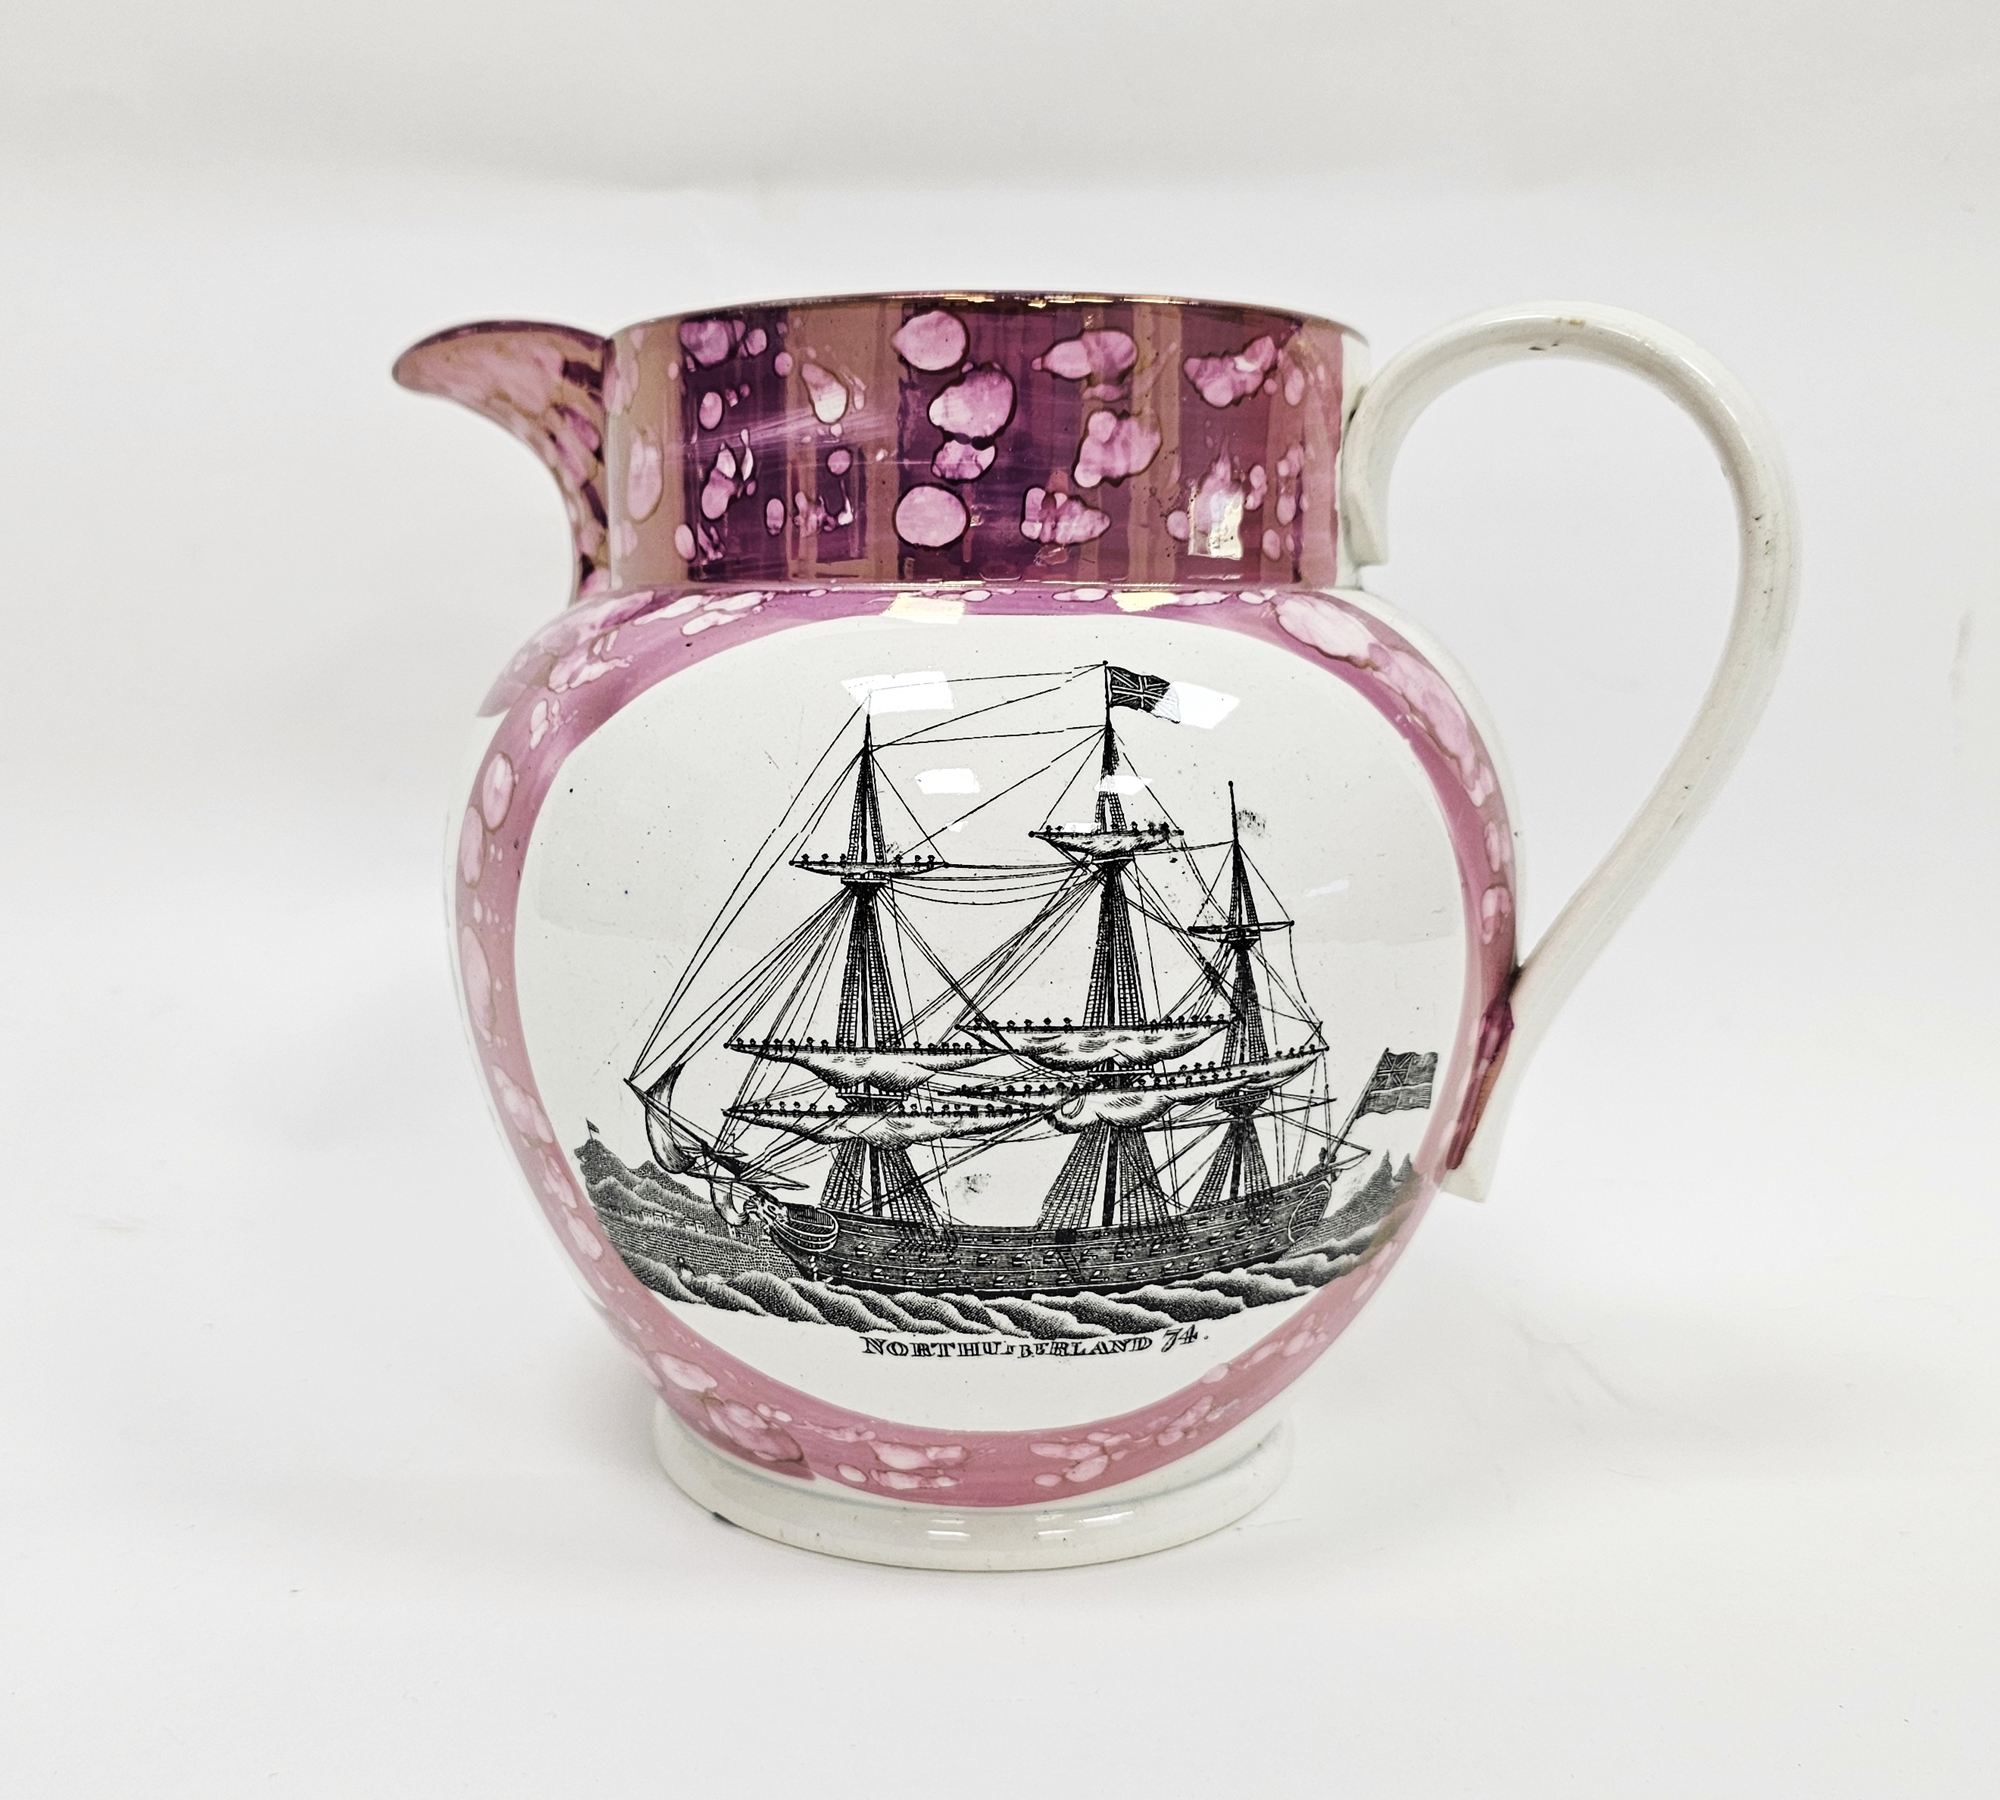 Sunderland pearlware lustre jug, early 19th century, printed with a ship titled 'Northumberland